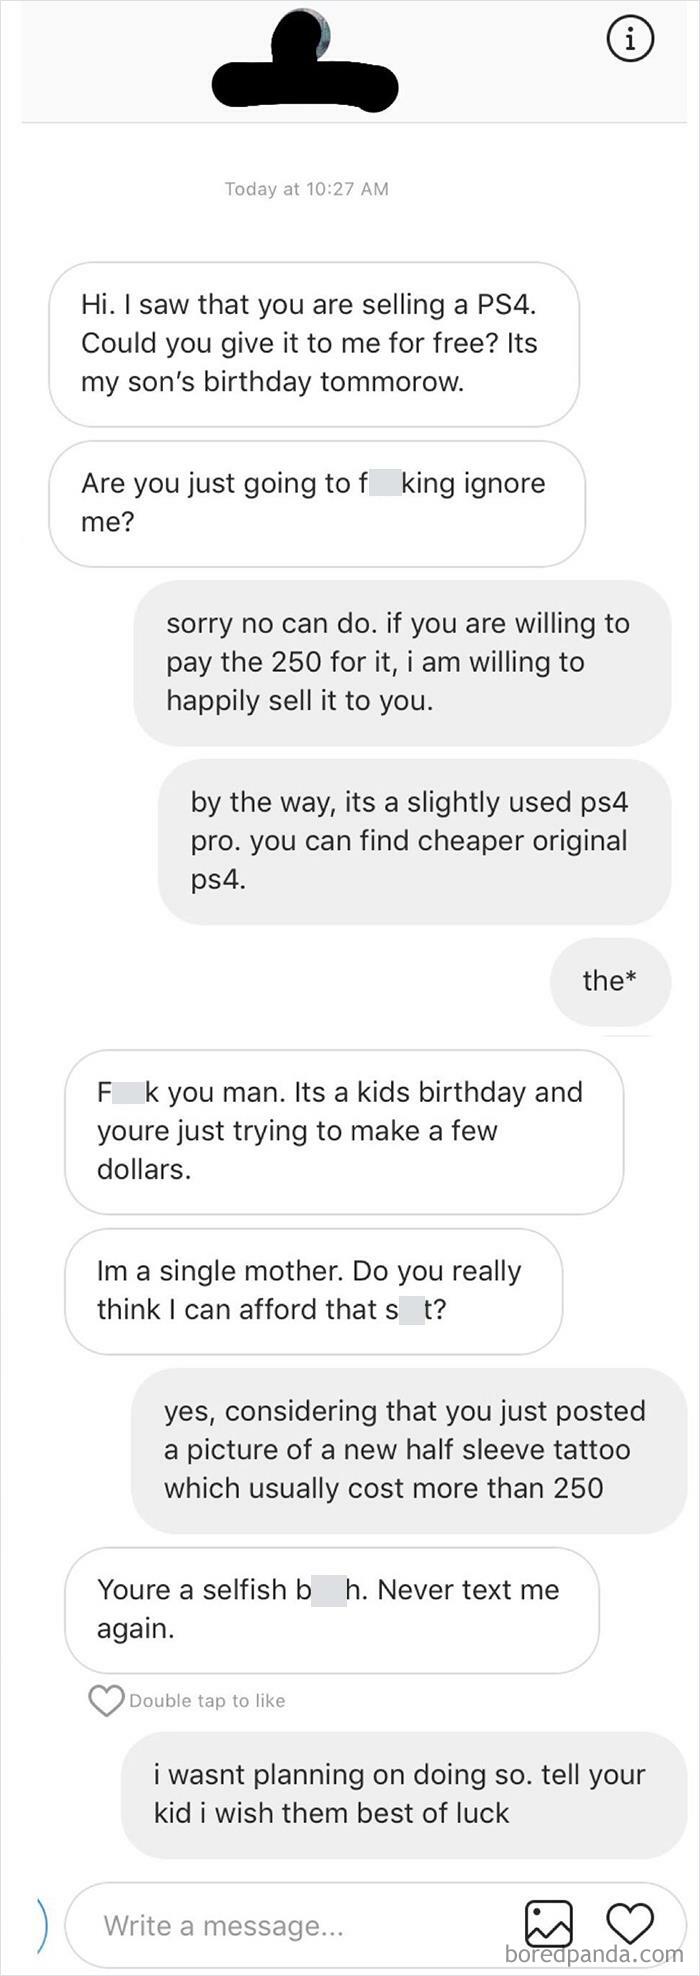 I Can Buy Things That Aren’t Too Useful For Myself, But When I Need A Gift For My Kid, I Want Someone Else To Pay For It